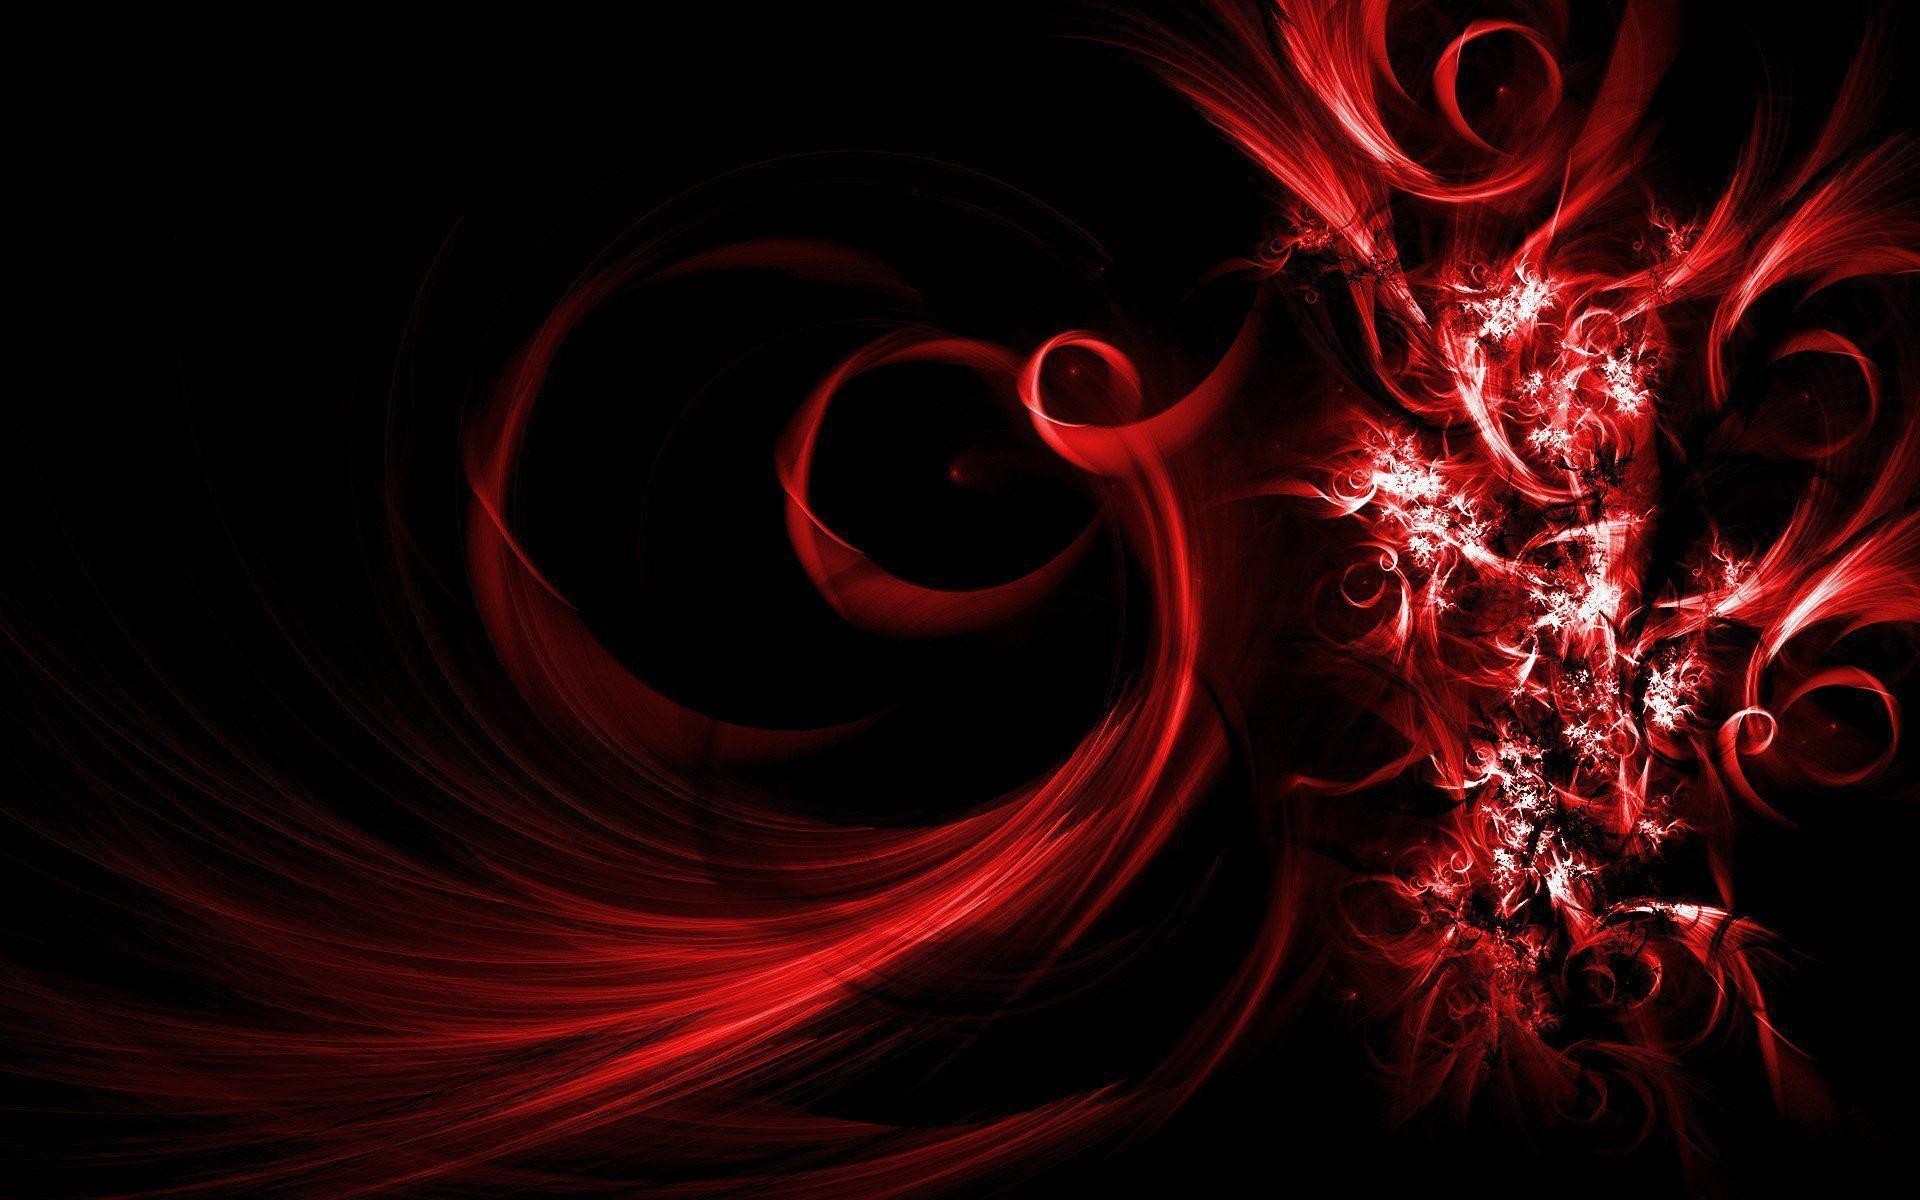 Black And Red Abstract Wallpaper Hd 1080P 12 HD Wallpapers | isghd.com